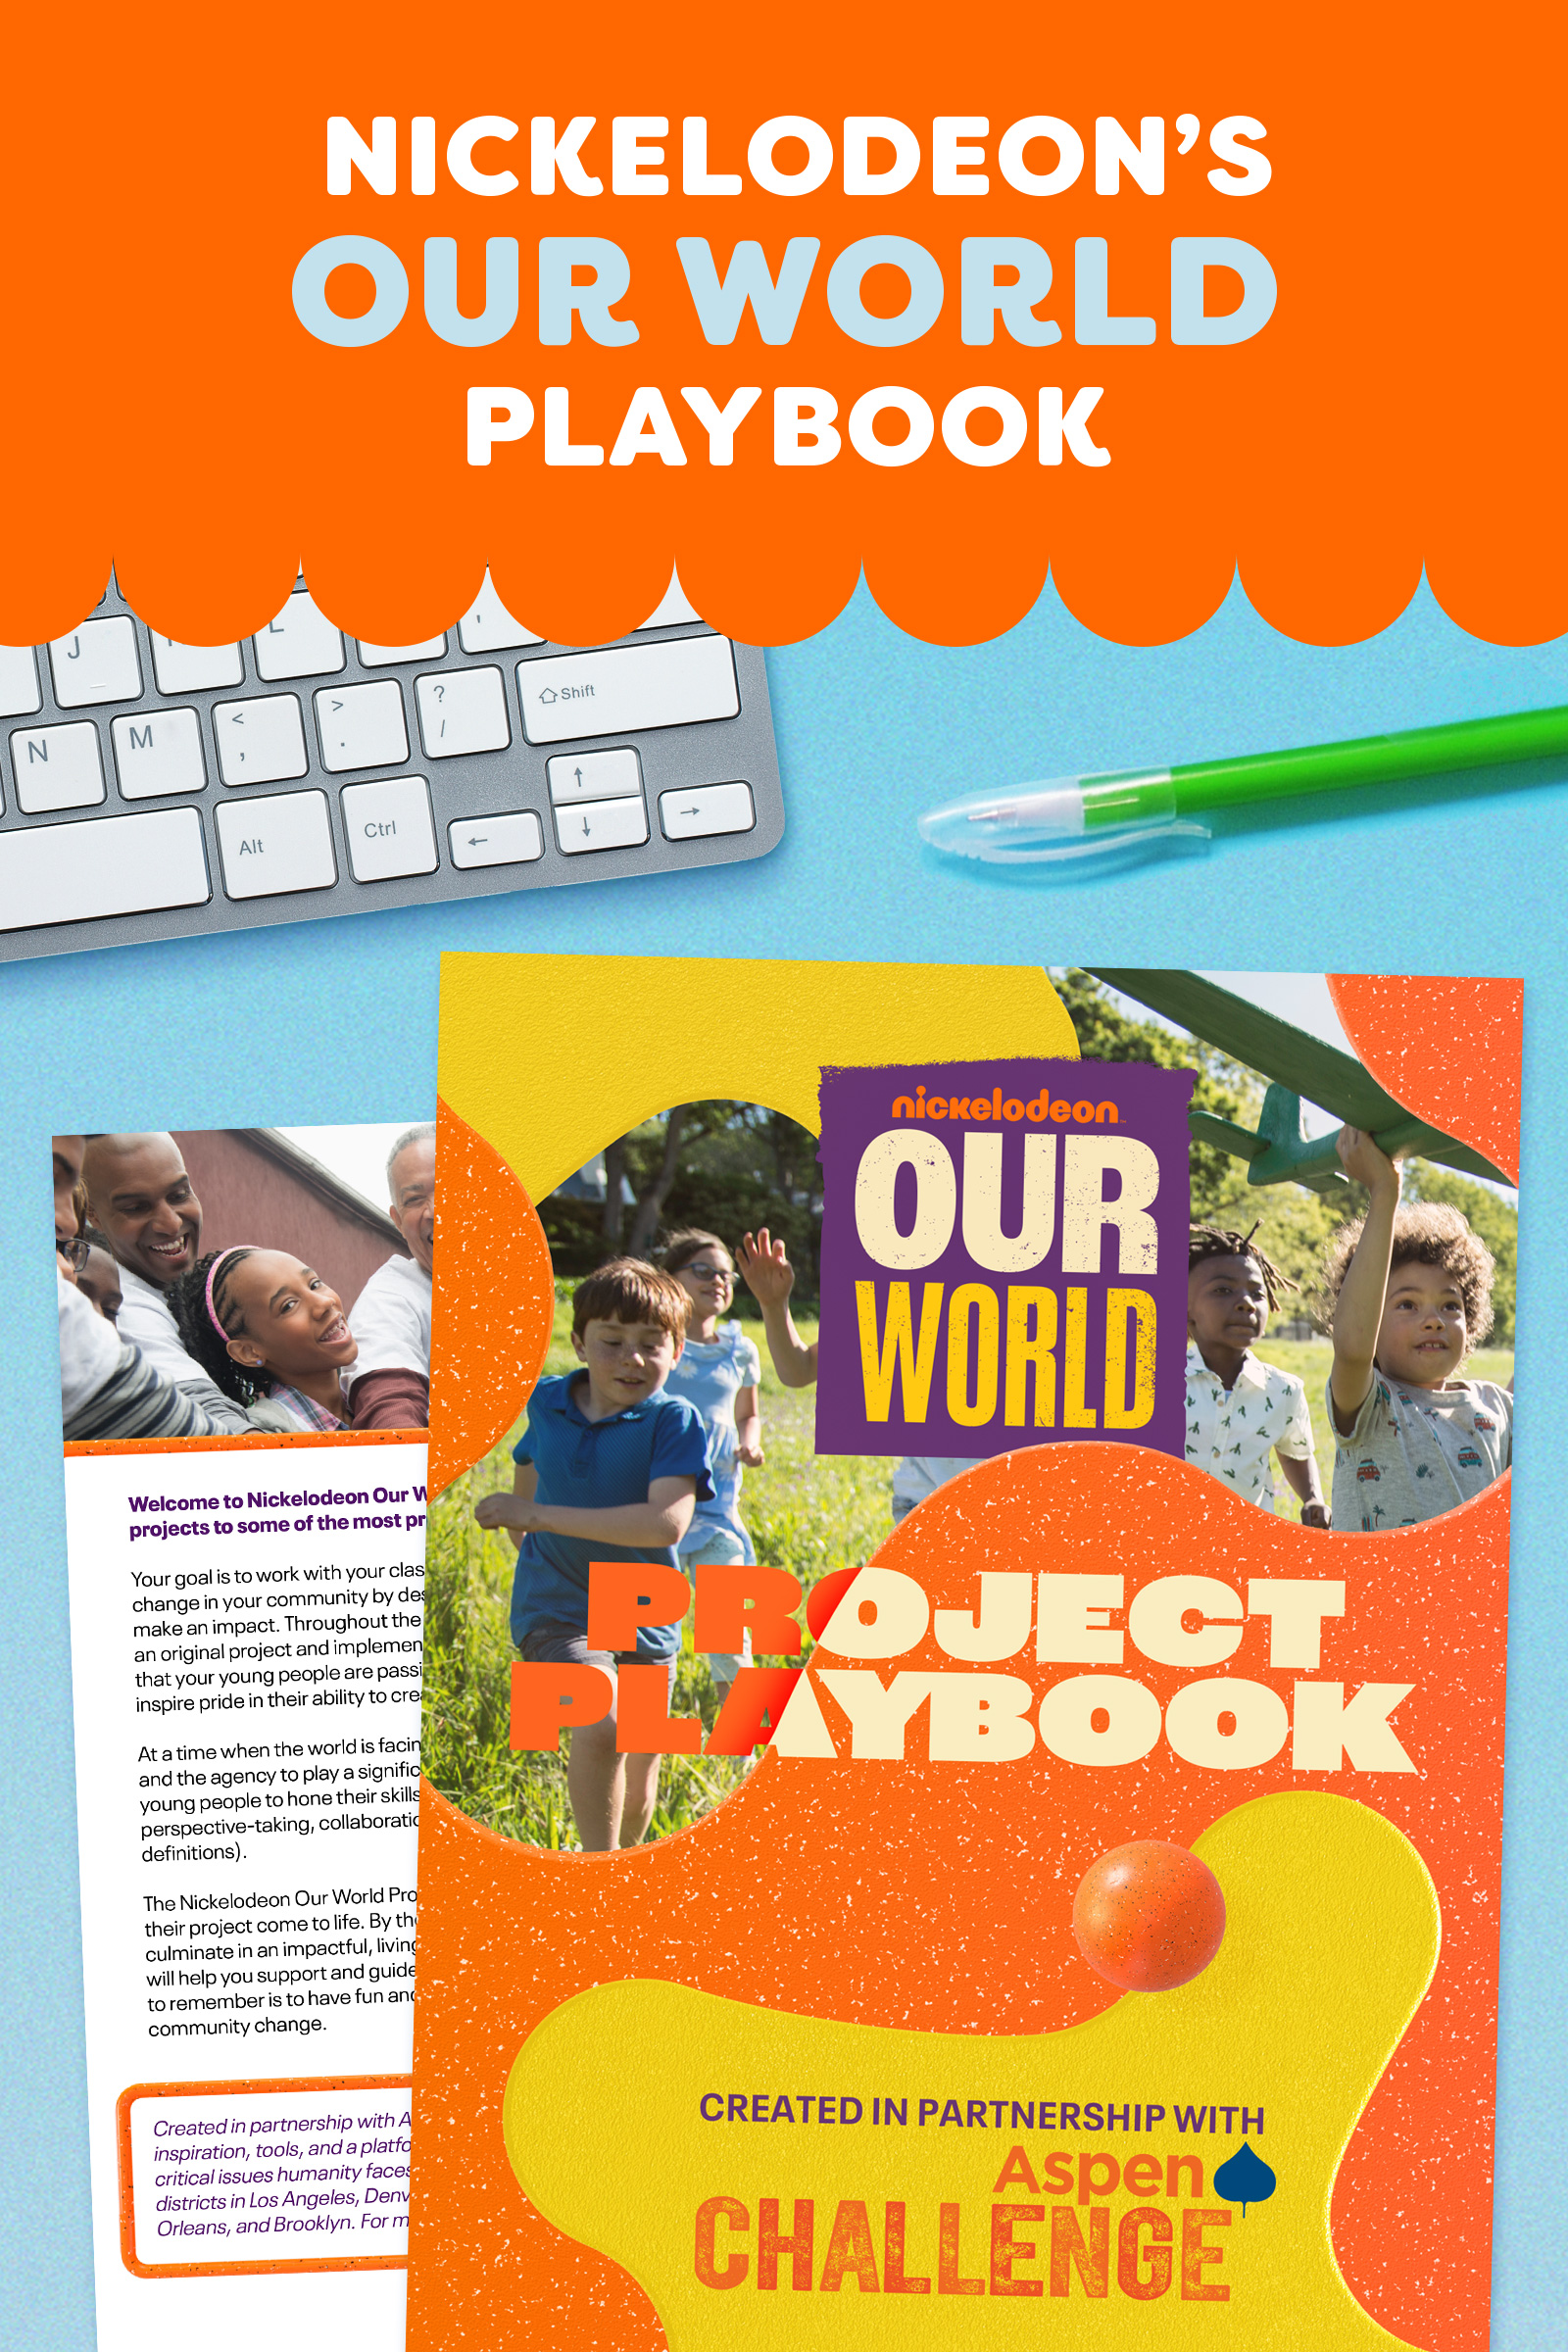 Nickelodeon's Our World Playbook